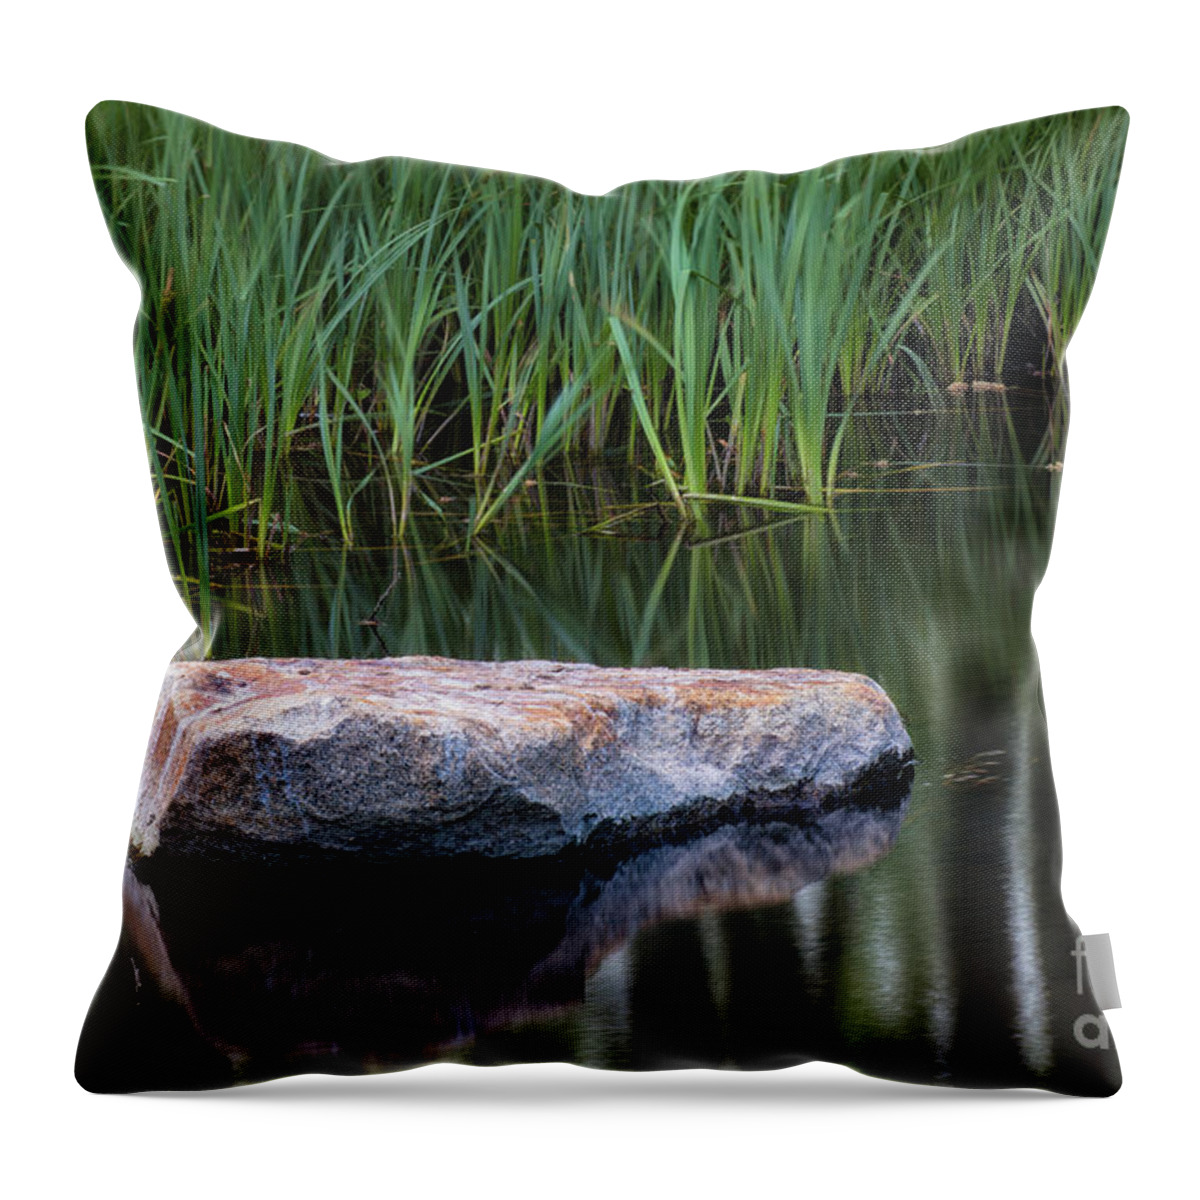 Pond Throw Pillow featuring the photograph Pond by Anthony Michael Bonafede